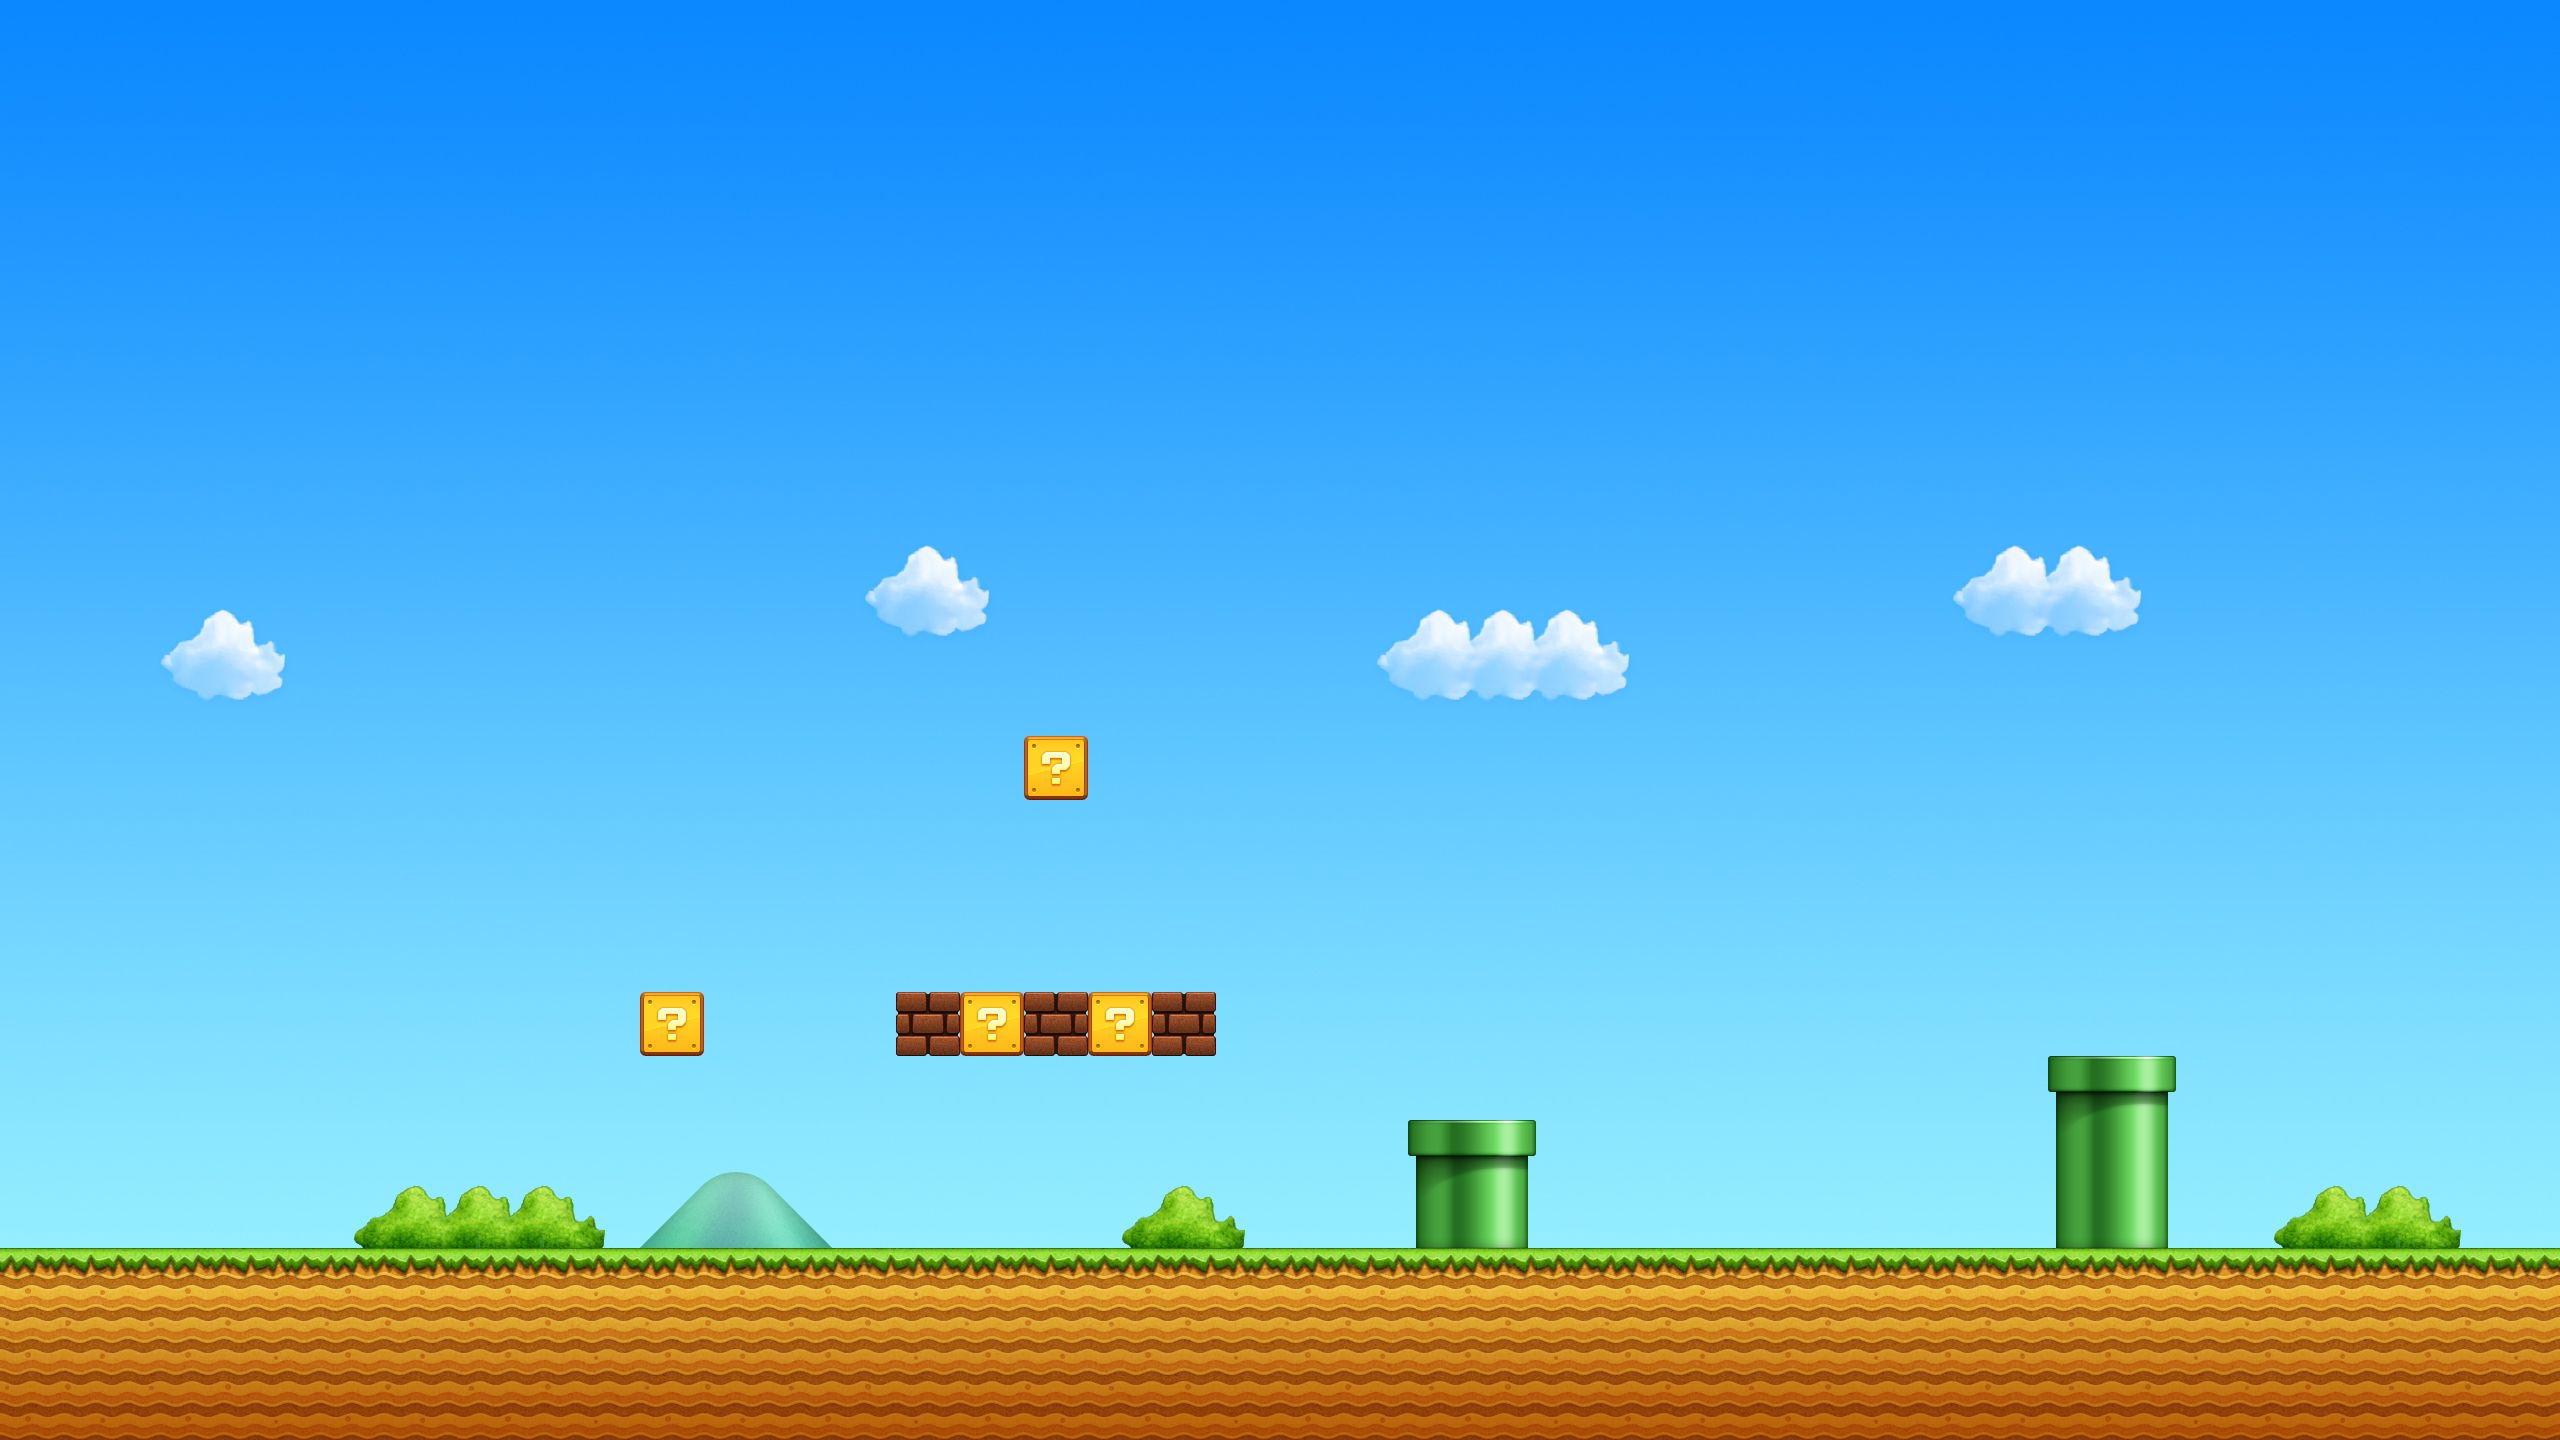 117 Super Mario Bros. HD Wallpapers | Backgrounds - Wallpaper Abyss